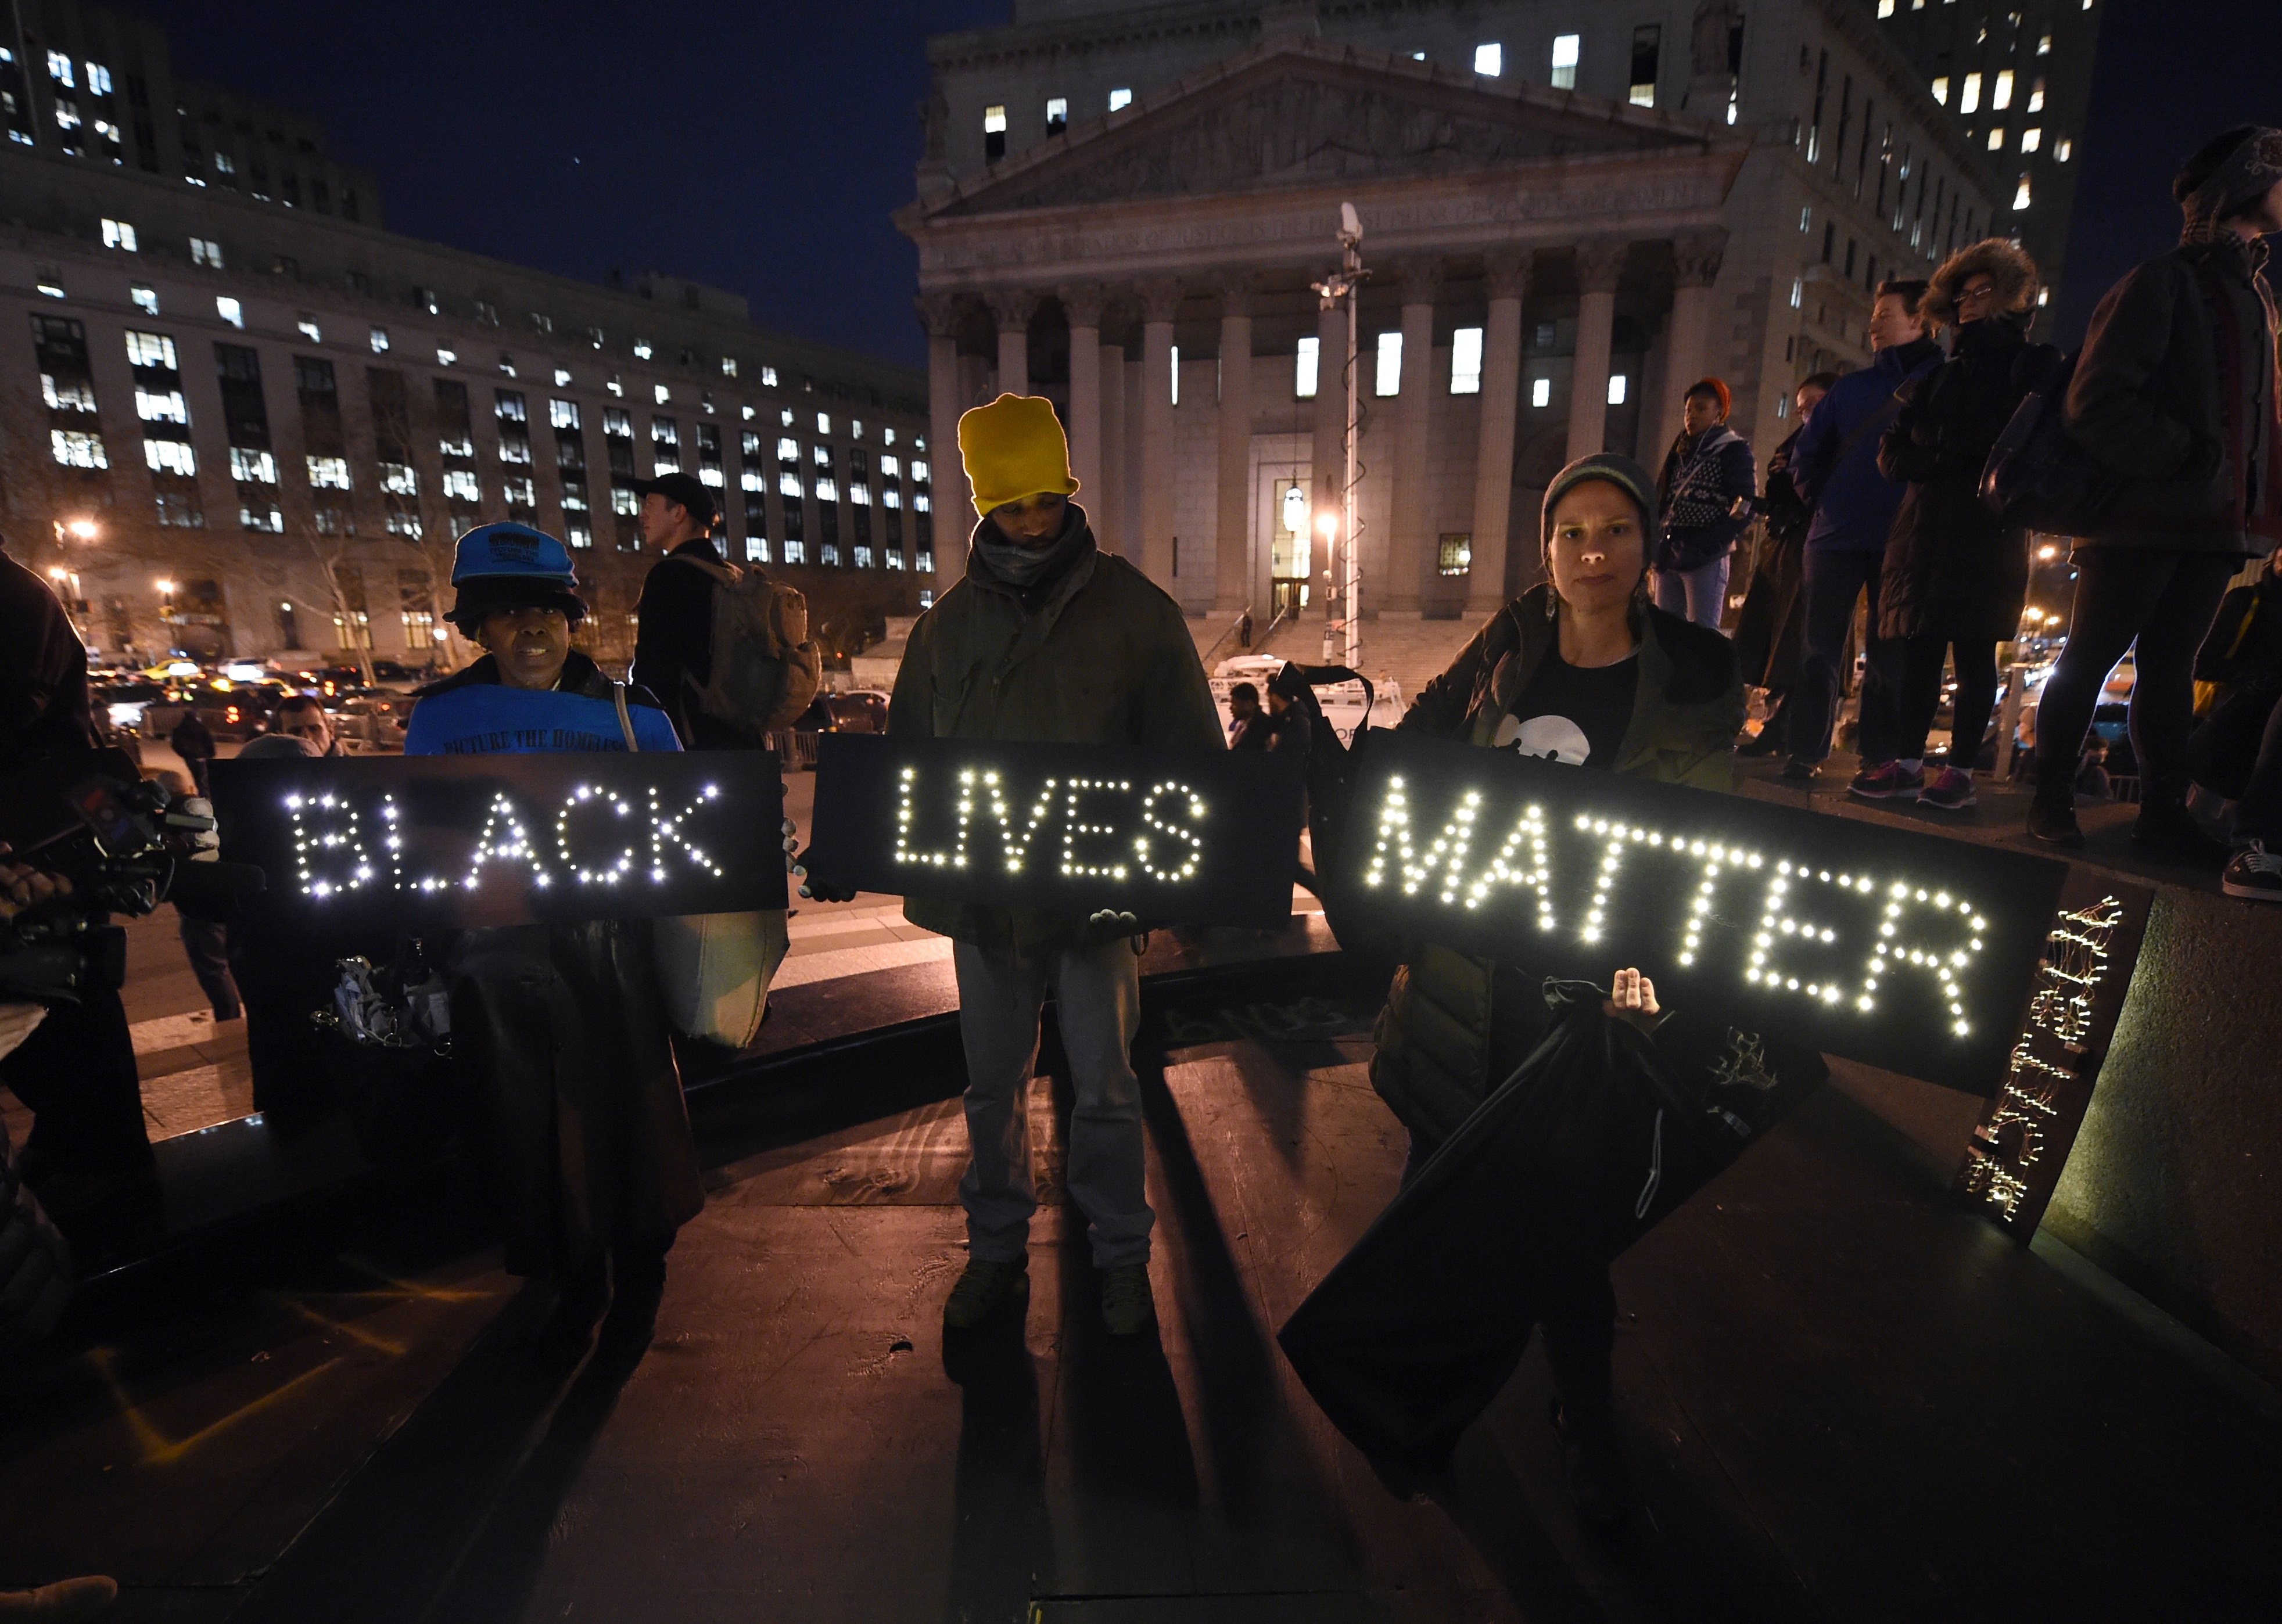 Protesters stand during a demonstration against the chokehold death of Eric Garner in Foley Square in New York City on Dec. 4, 2014. (Timothy A. Clary—AFP/Getty Images)